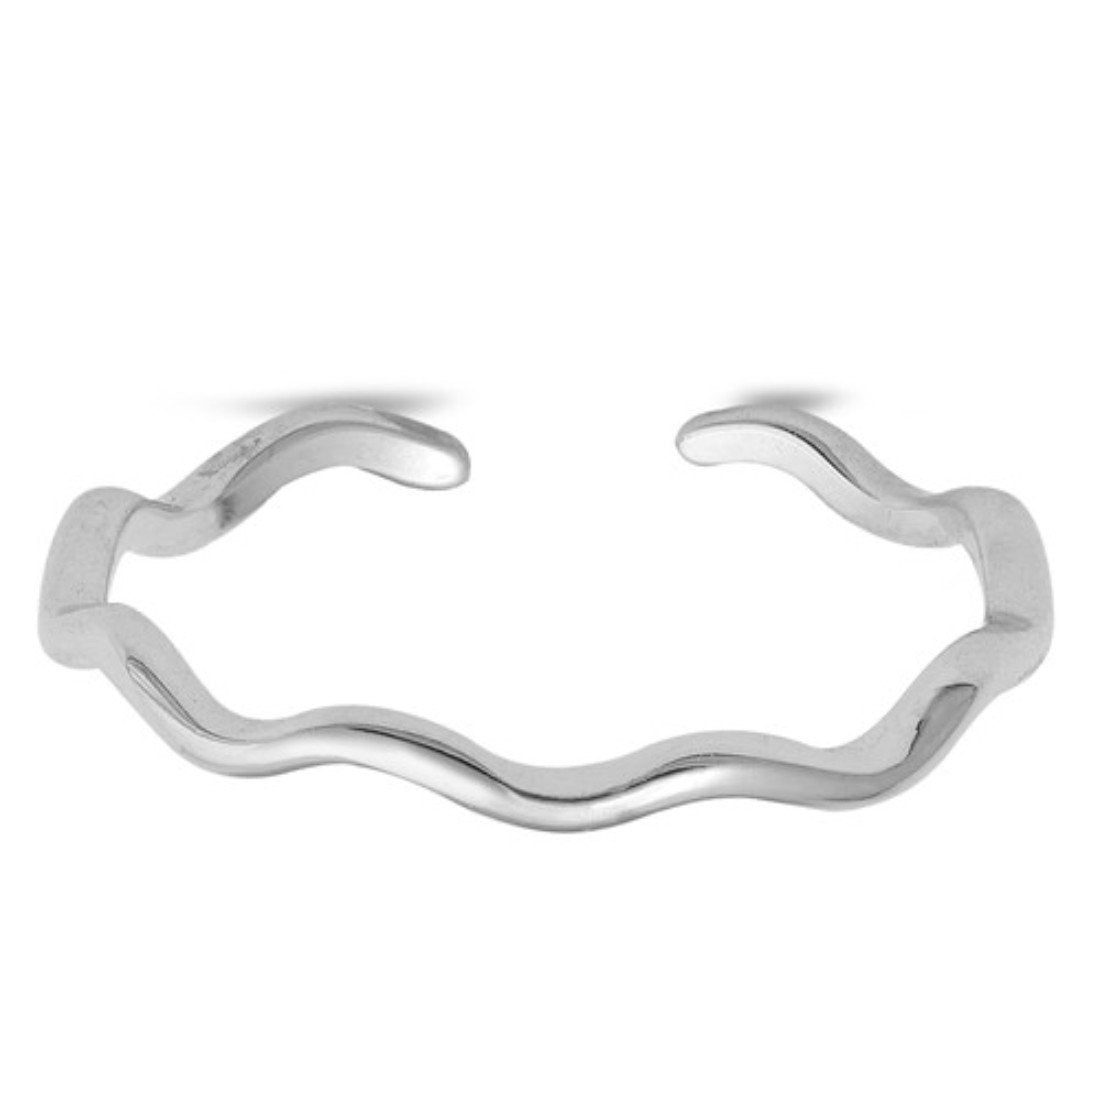 Waves Toe Ring Adjustable Band 925 Sterling Silver For Women (2mm)